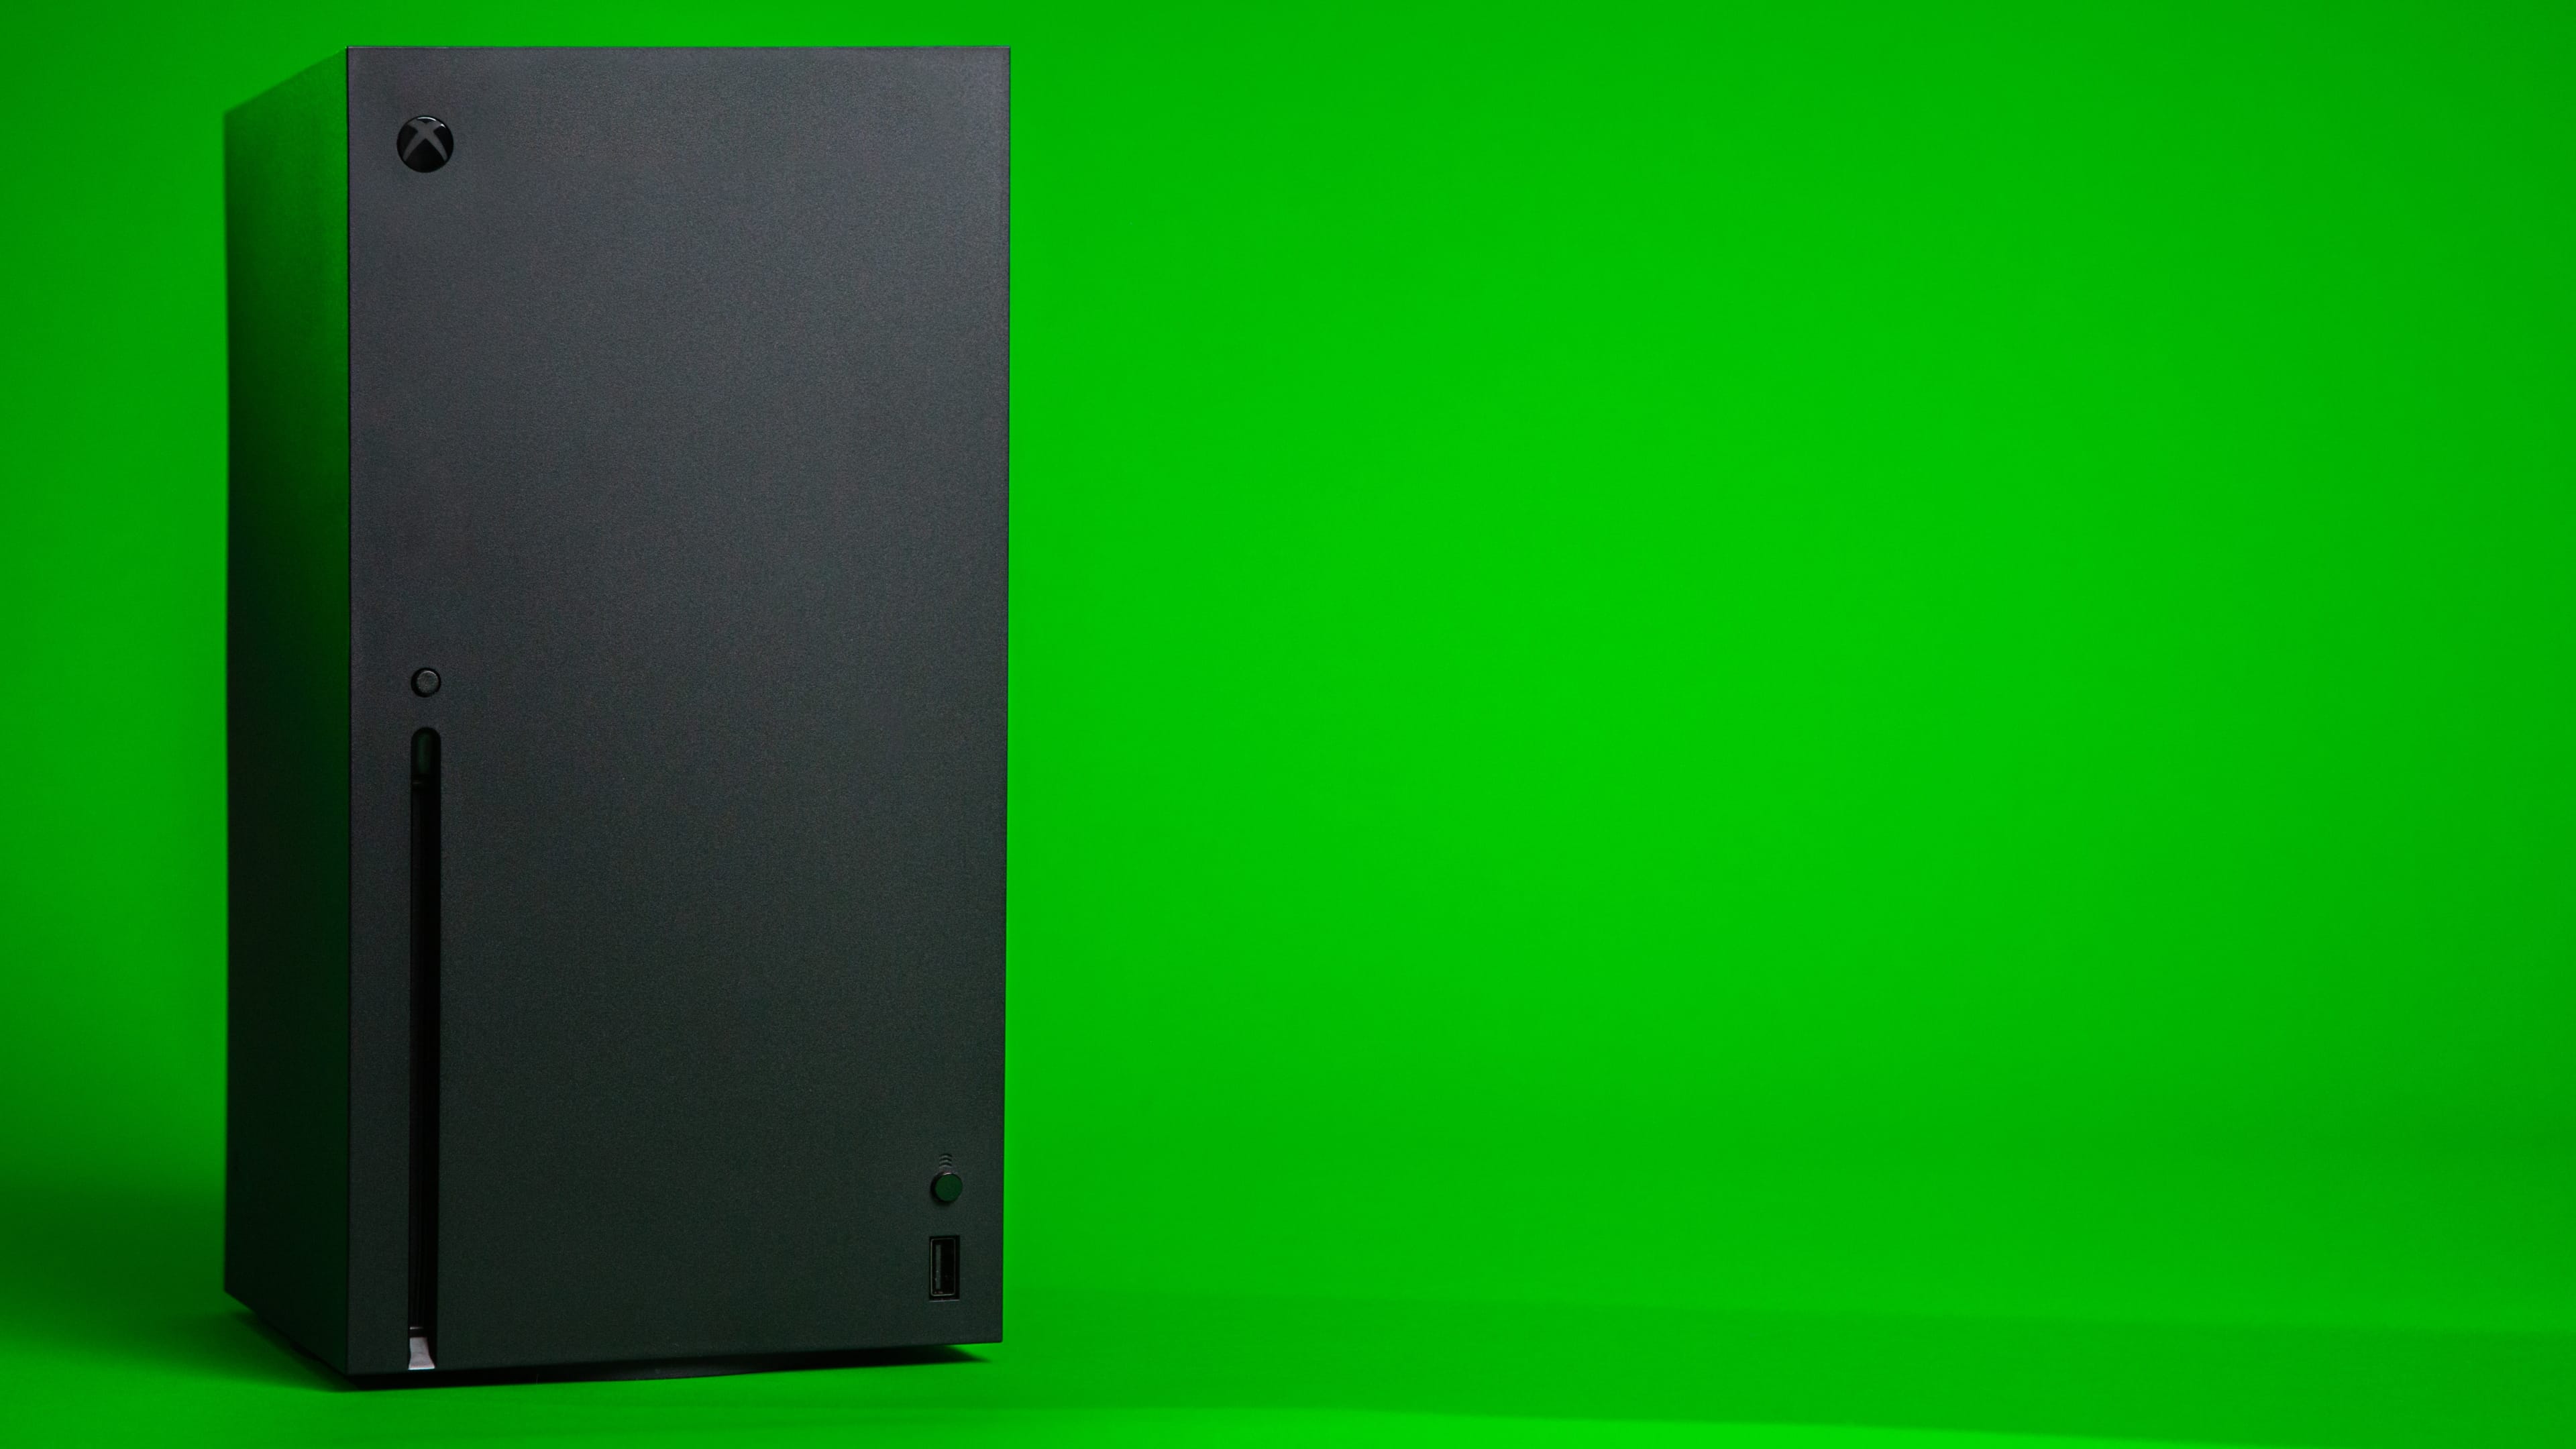 Microsoft's Xbox Series X console in an upright position, set against a green backdrop